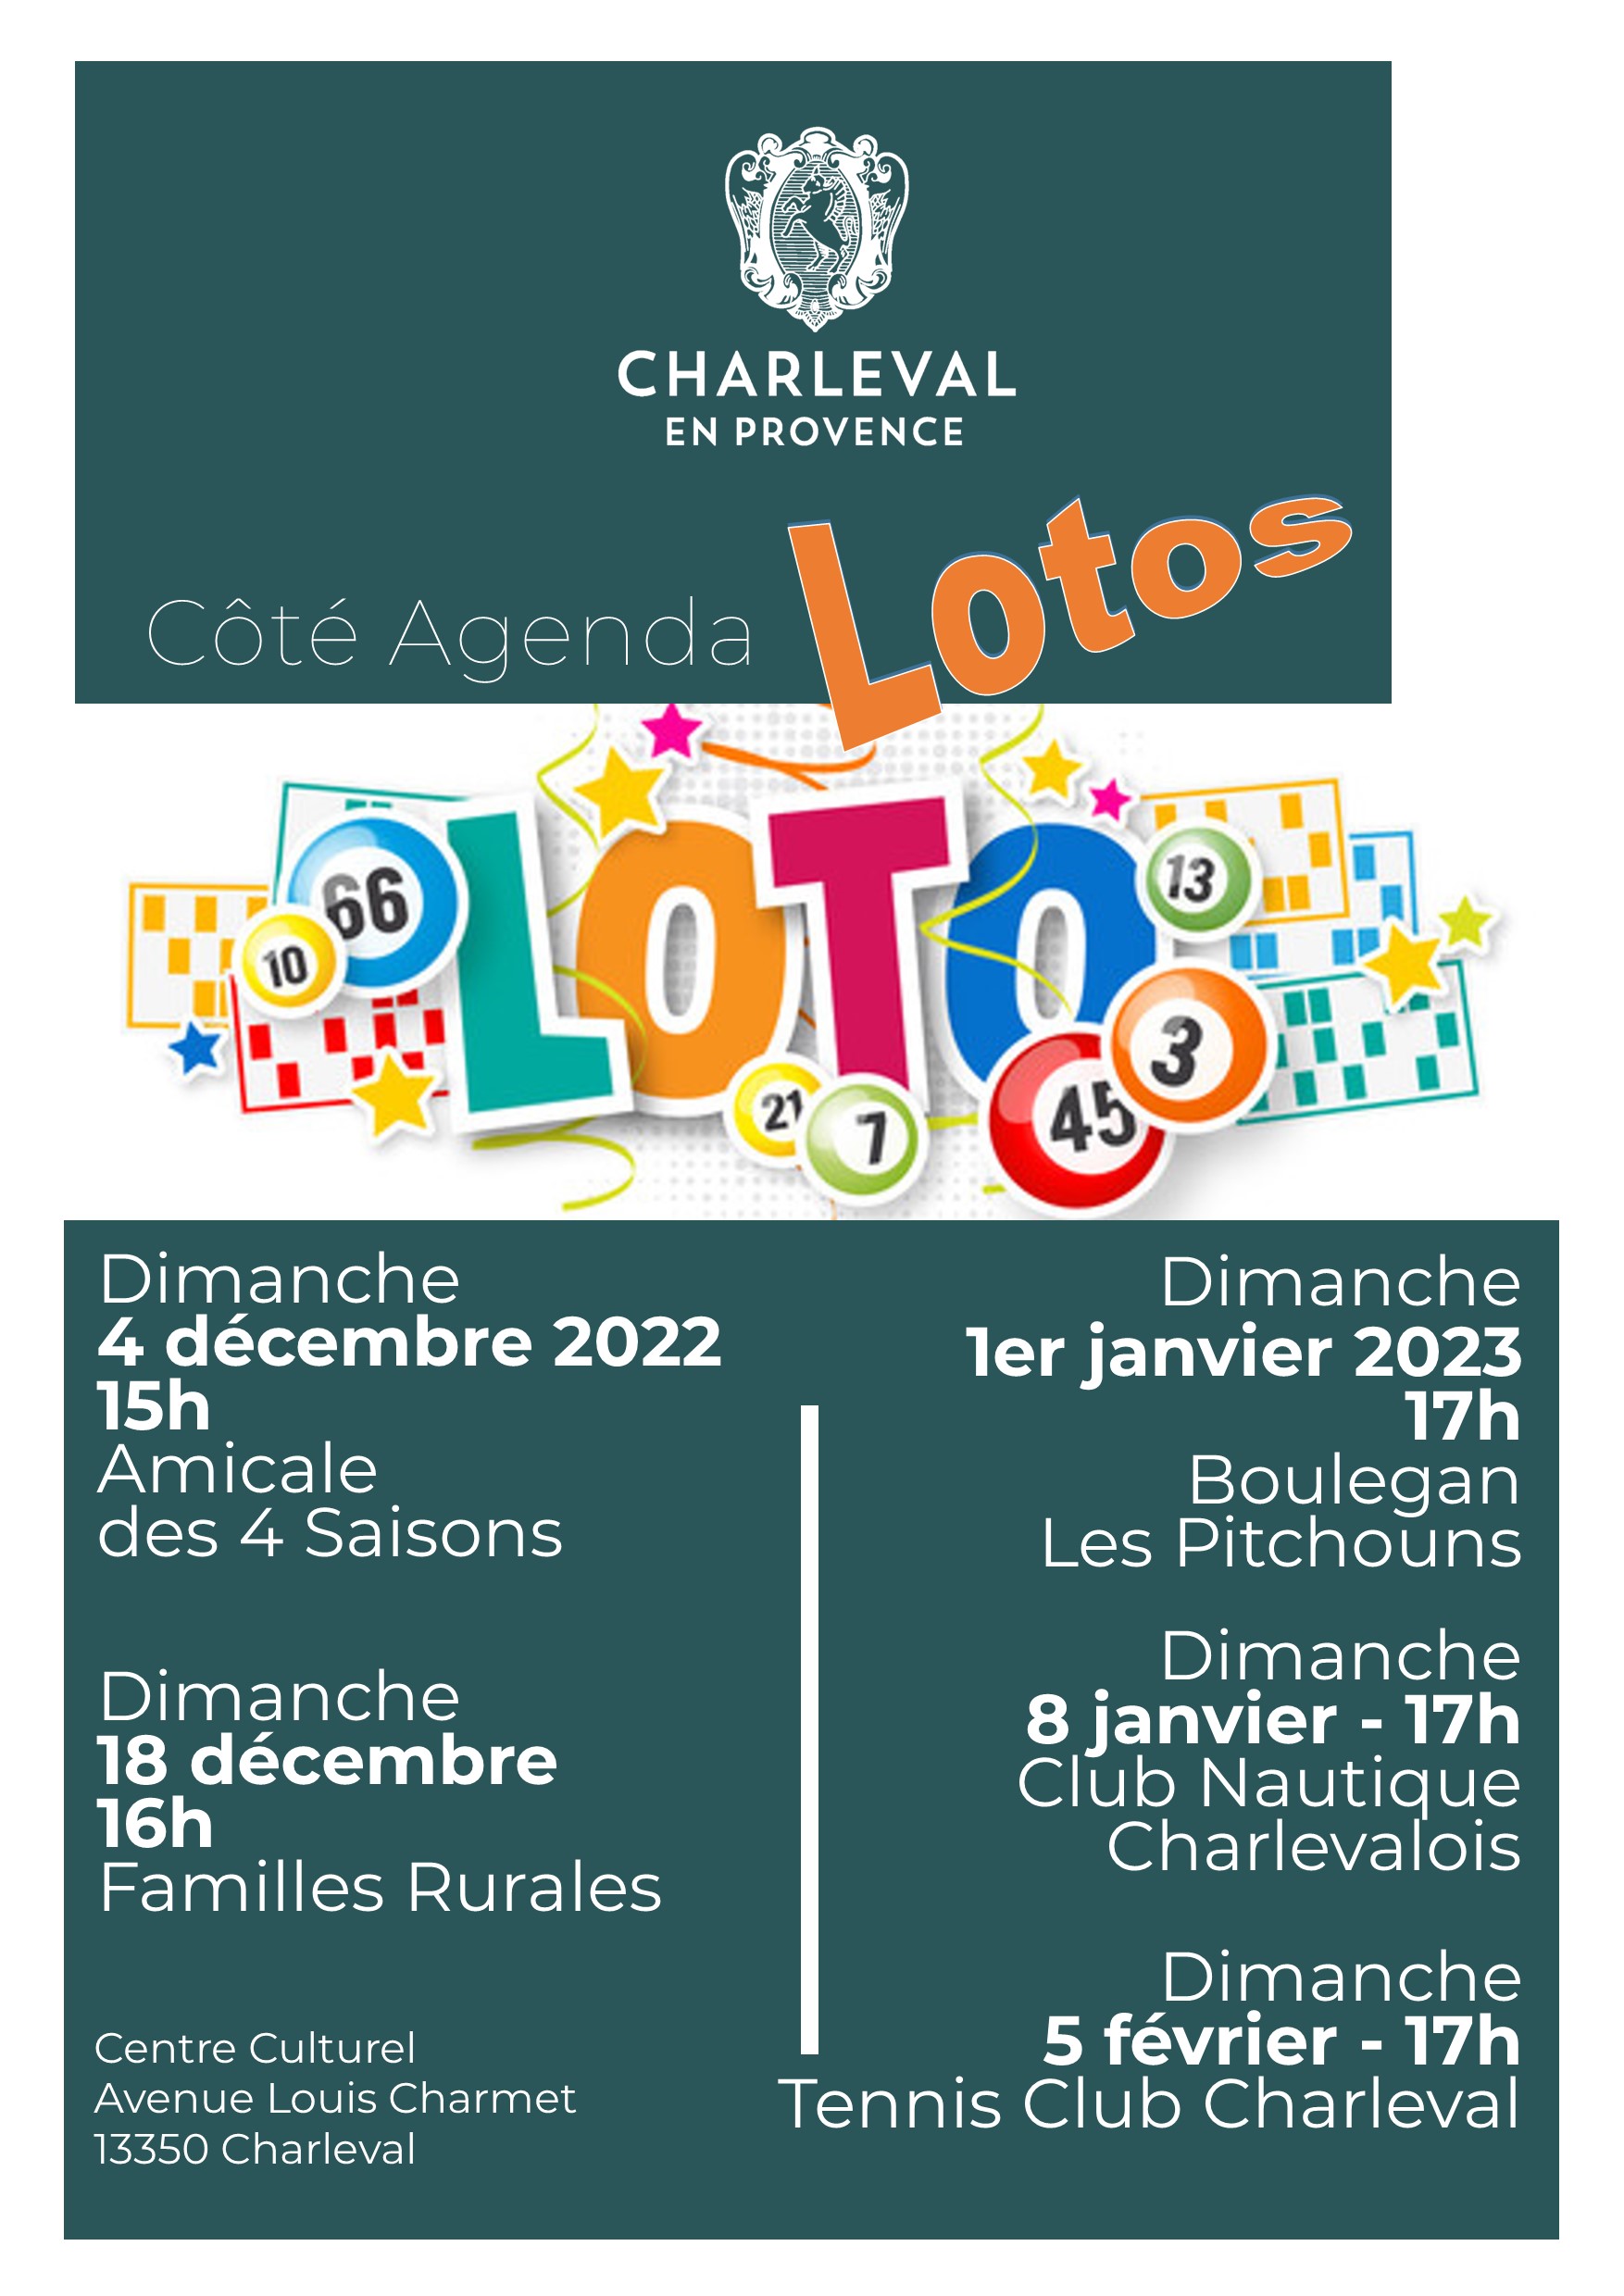 Cot lotos Charleval calendrier 2022 2023